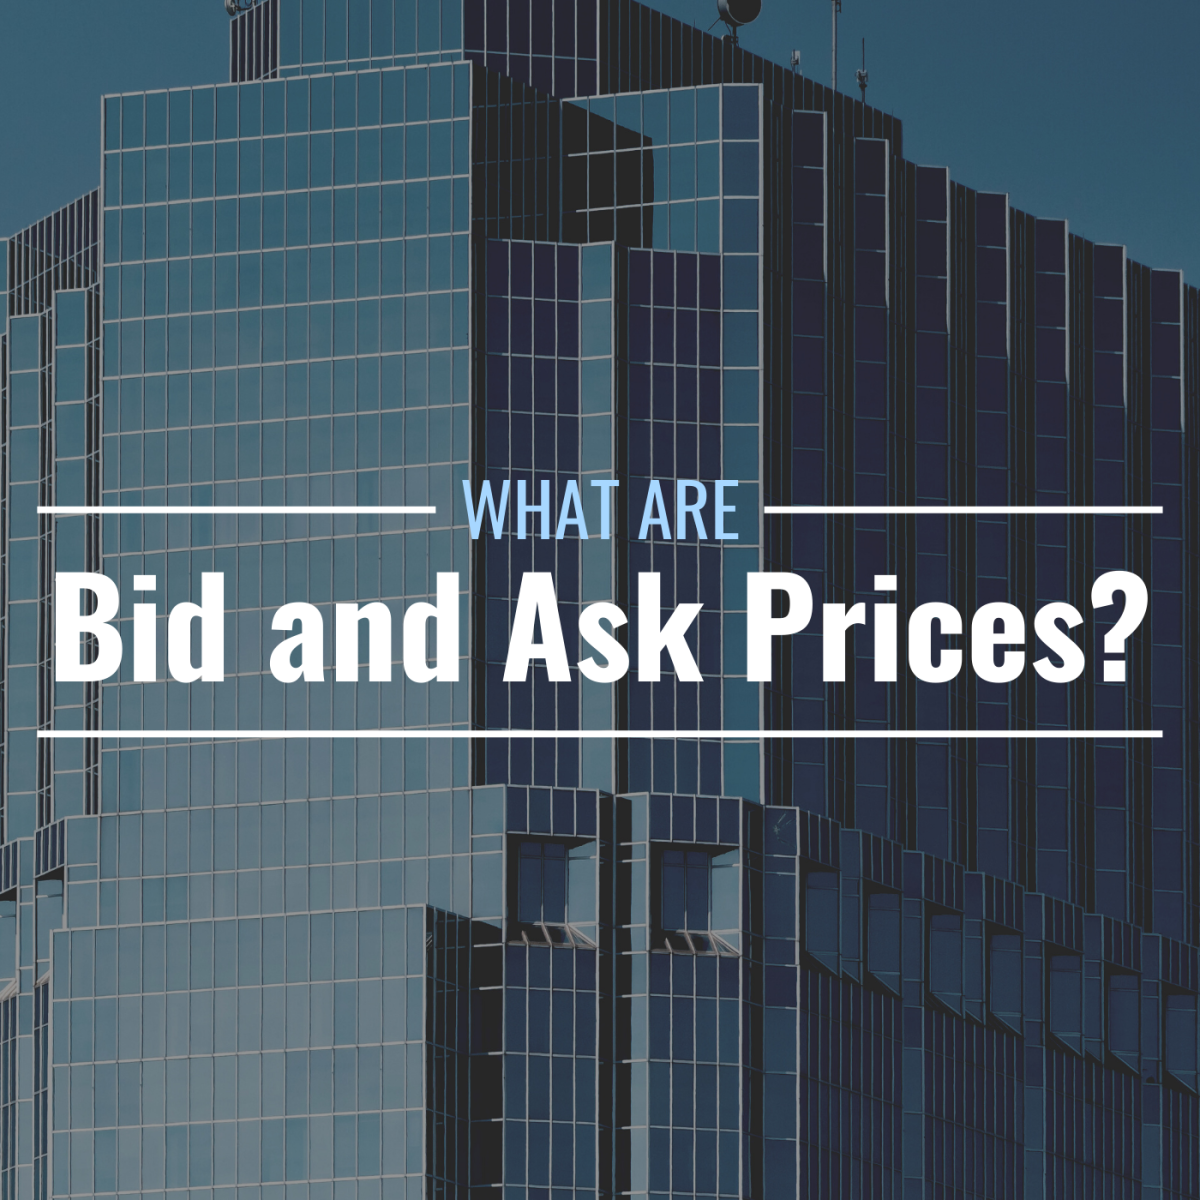 Darkened photo of a large, corporate-looking building with glass windows—text overlay reads "What Are Bid and Ask Prices?"